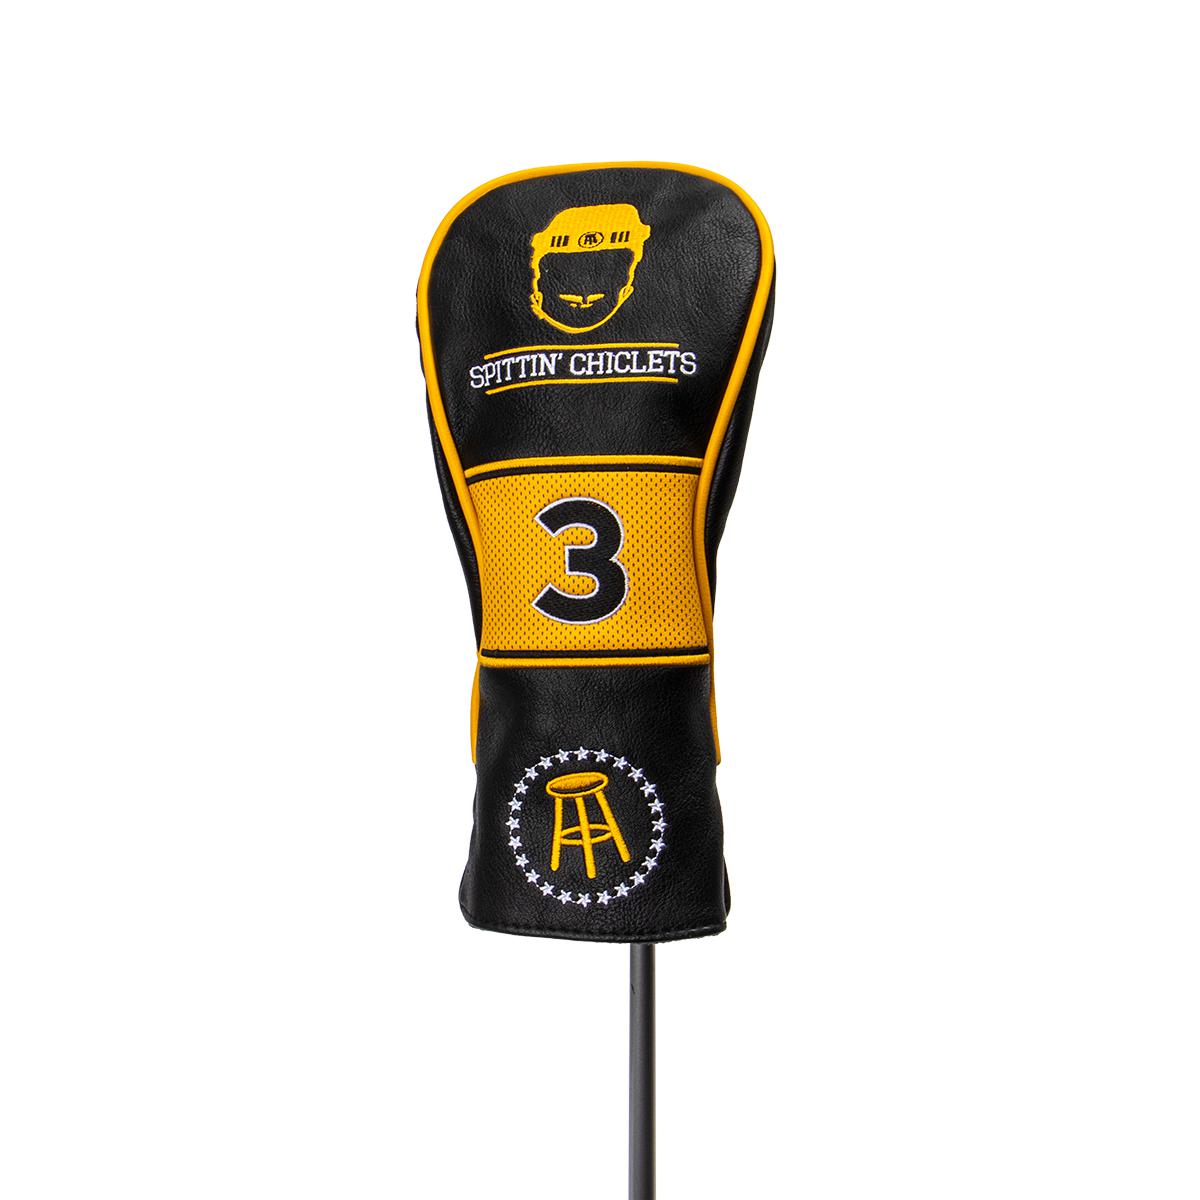 Spittin Chiclets Fairway Wood Headcover-Golf Accessories-Spittin Chiclets-Black-One Size-Barstool Sports